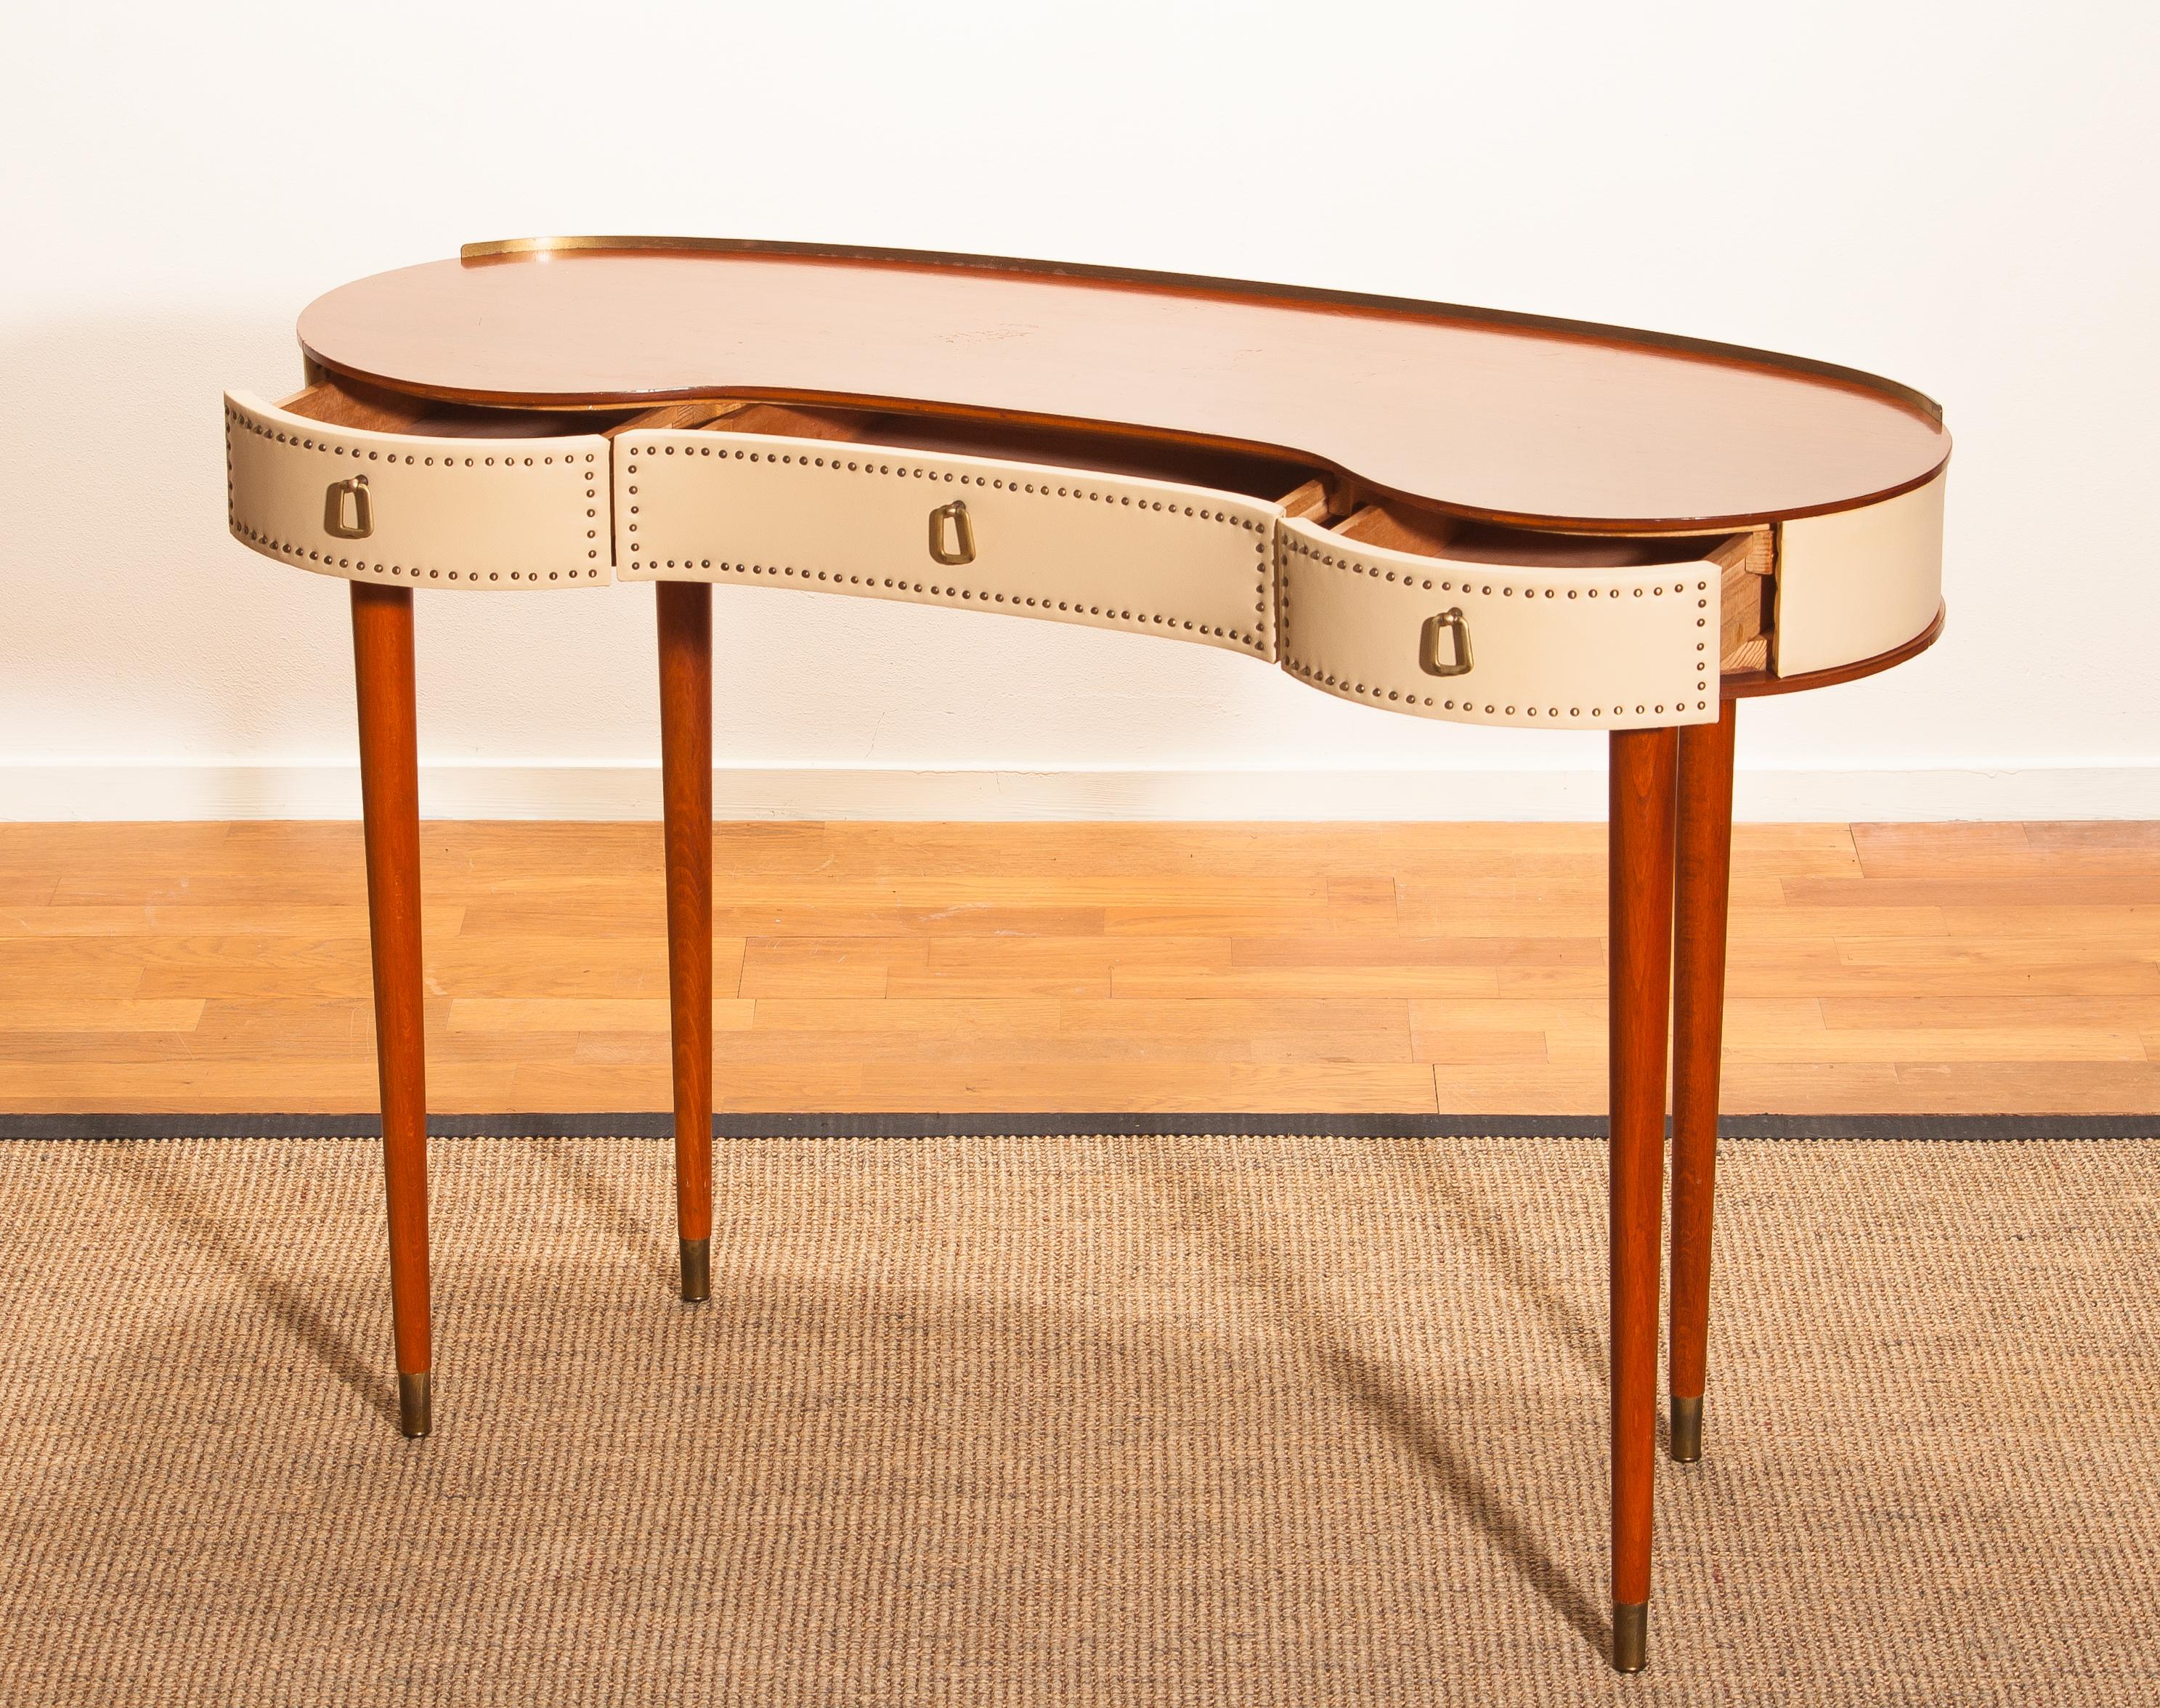 Mid-20th Century Mahogany Vanity / Dressing Table by Halvdan Pettersson for Tibro, Sweden, 1950s